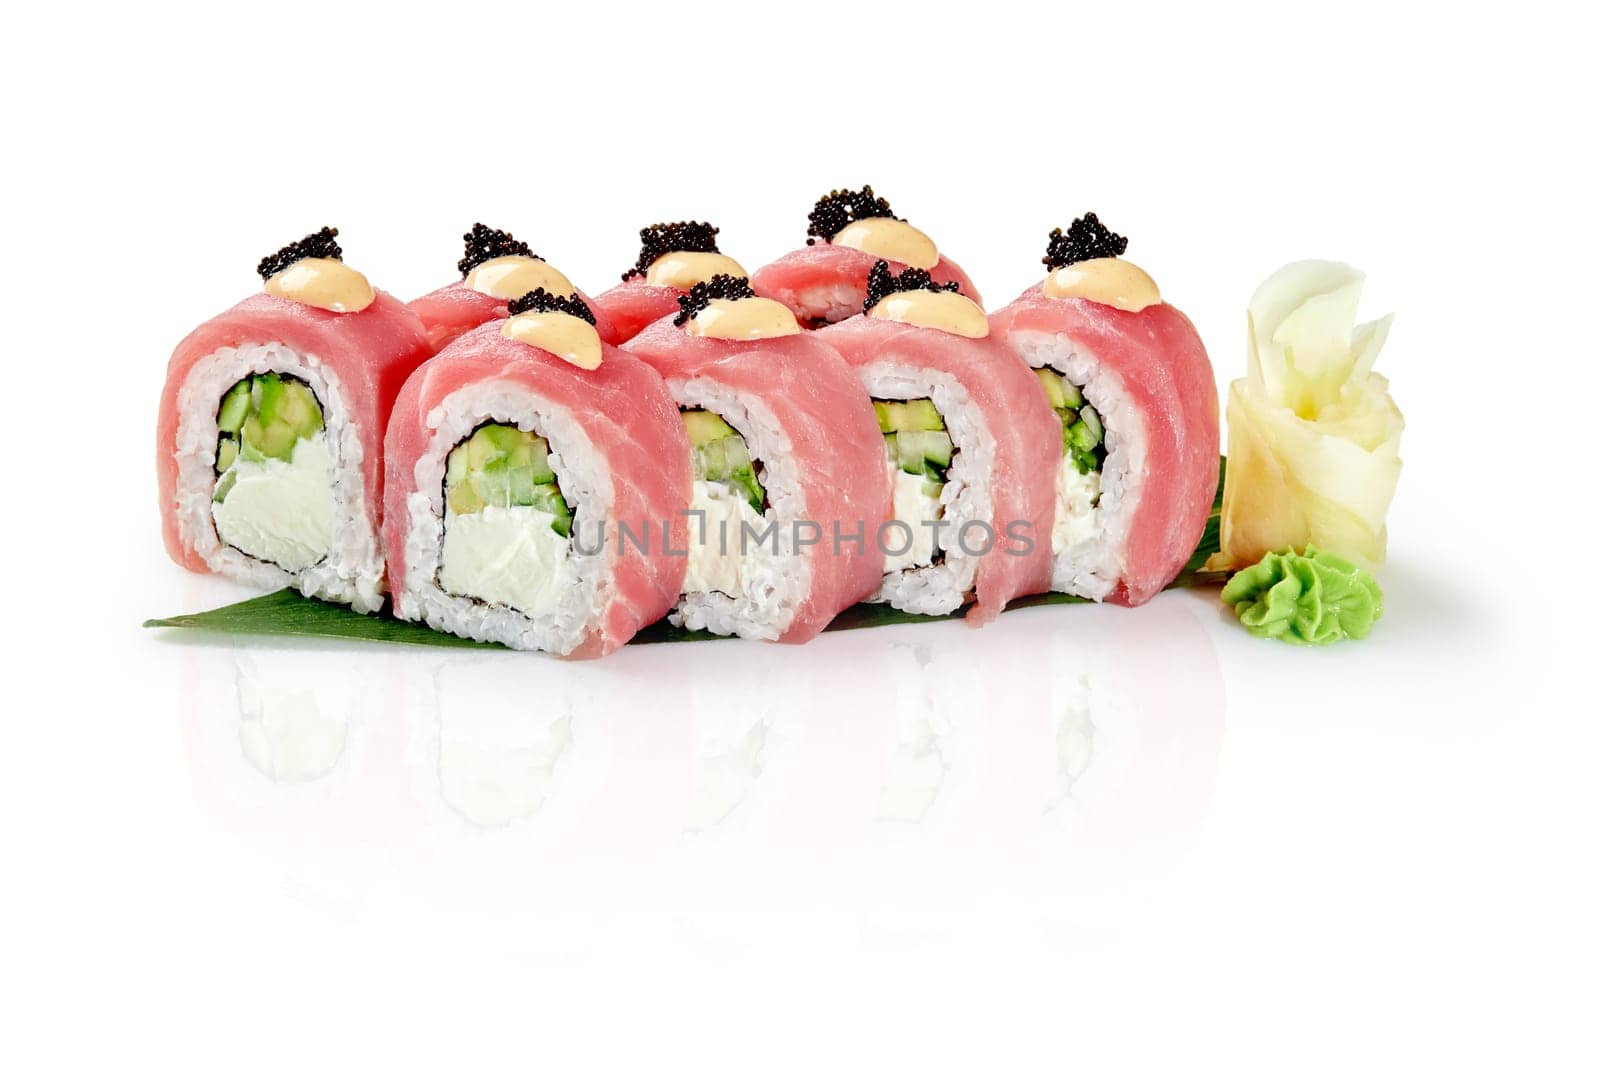 Appetizing Philadelphia sushi rolls filled with cream cheese and cucumbers topped with fresh tuna fillet, spicy sauce and black tobiko served with wasabi and pickled ginger on bamboo leaf